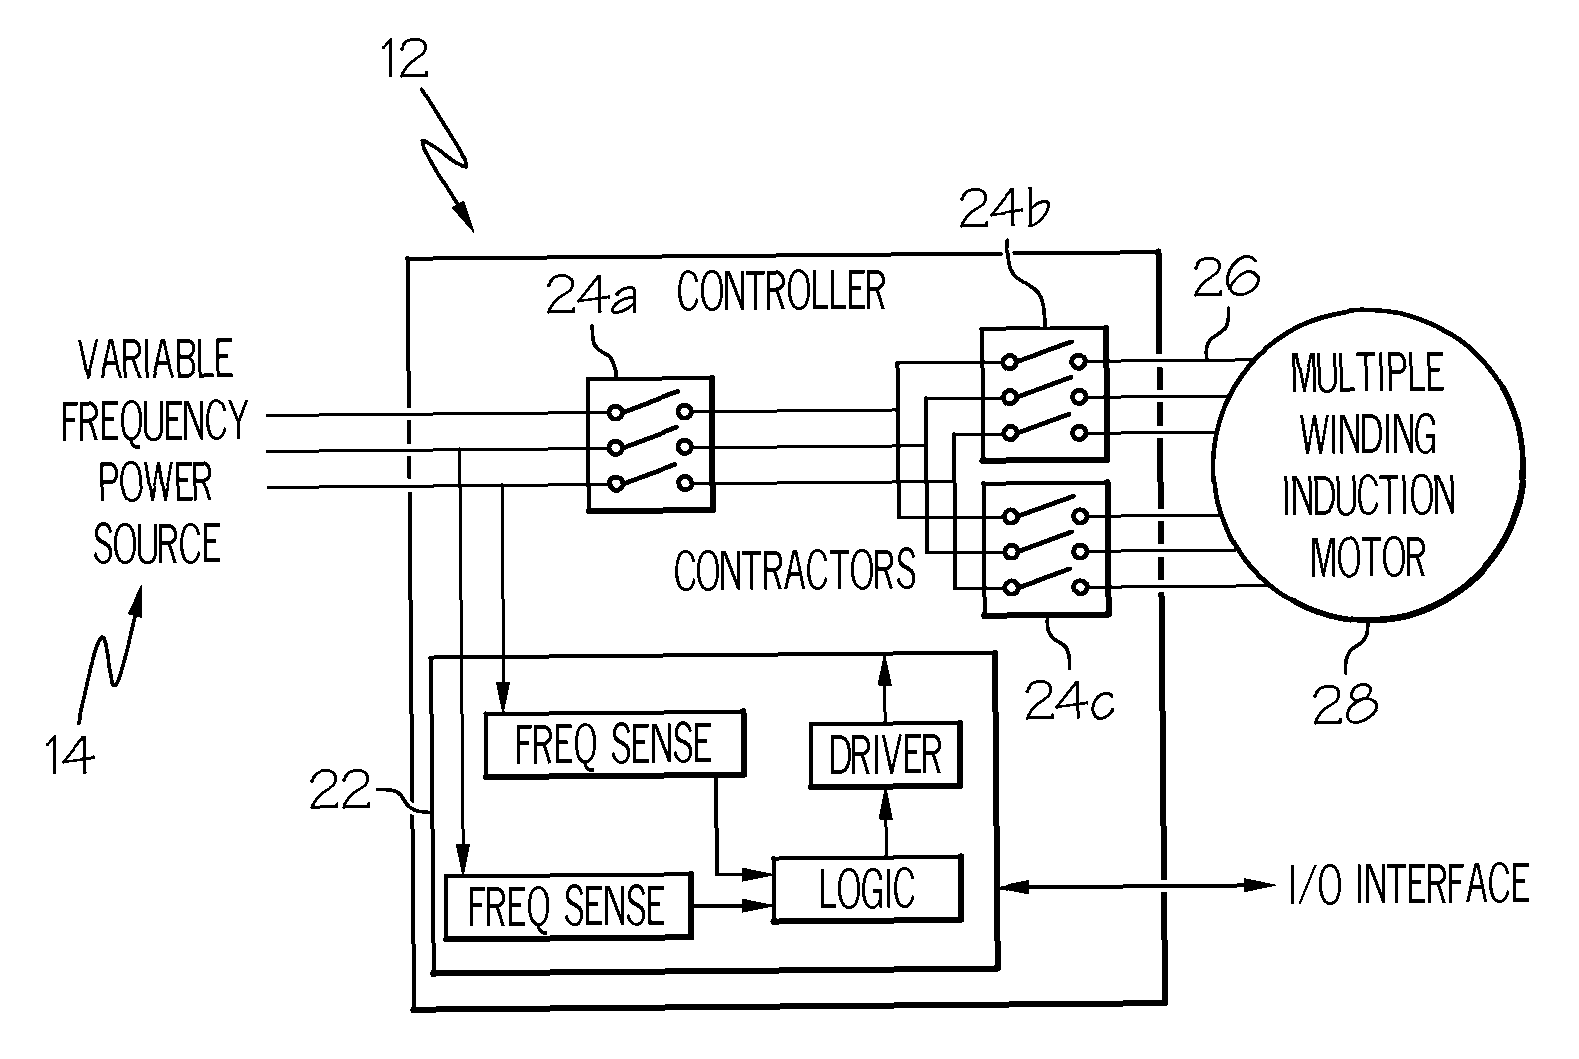 Variable frequency reduced speed variation electric drive